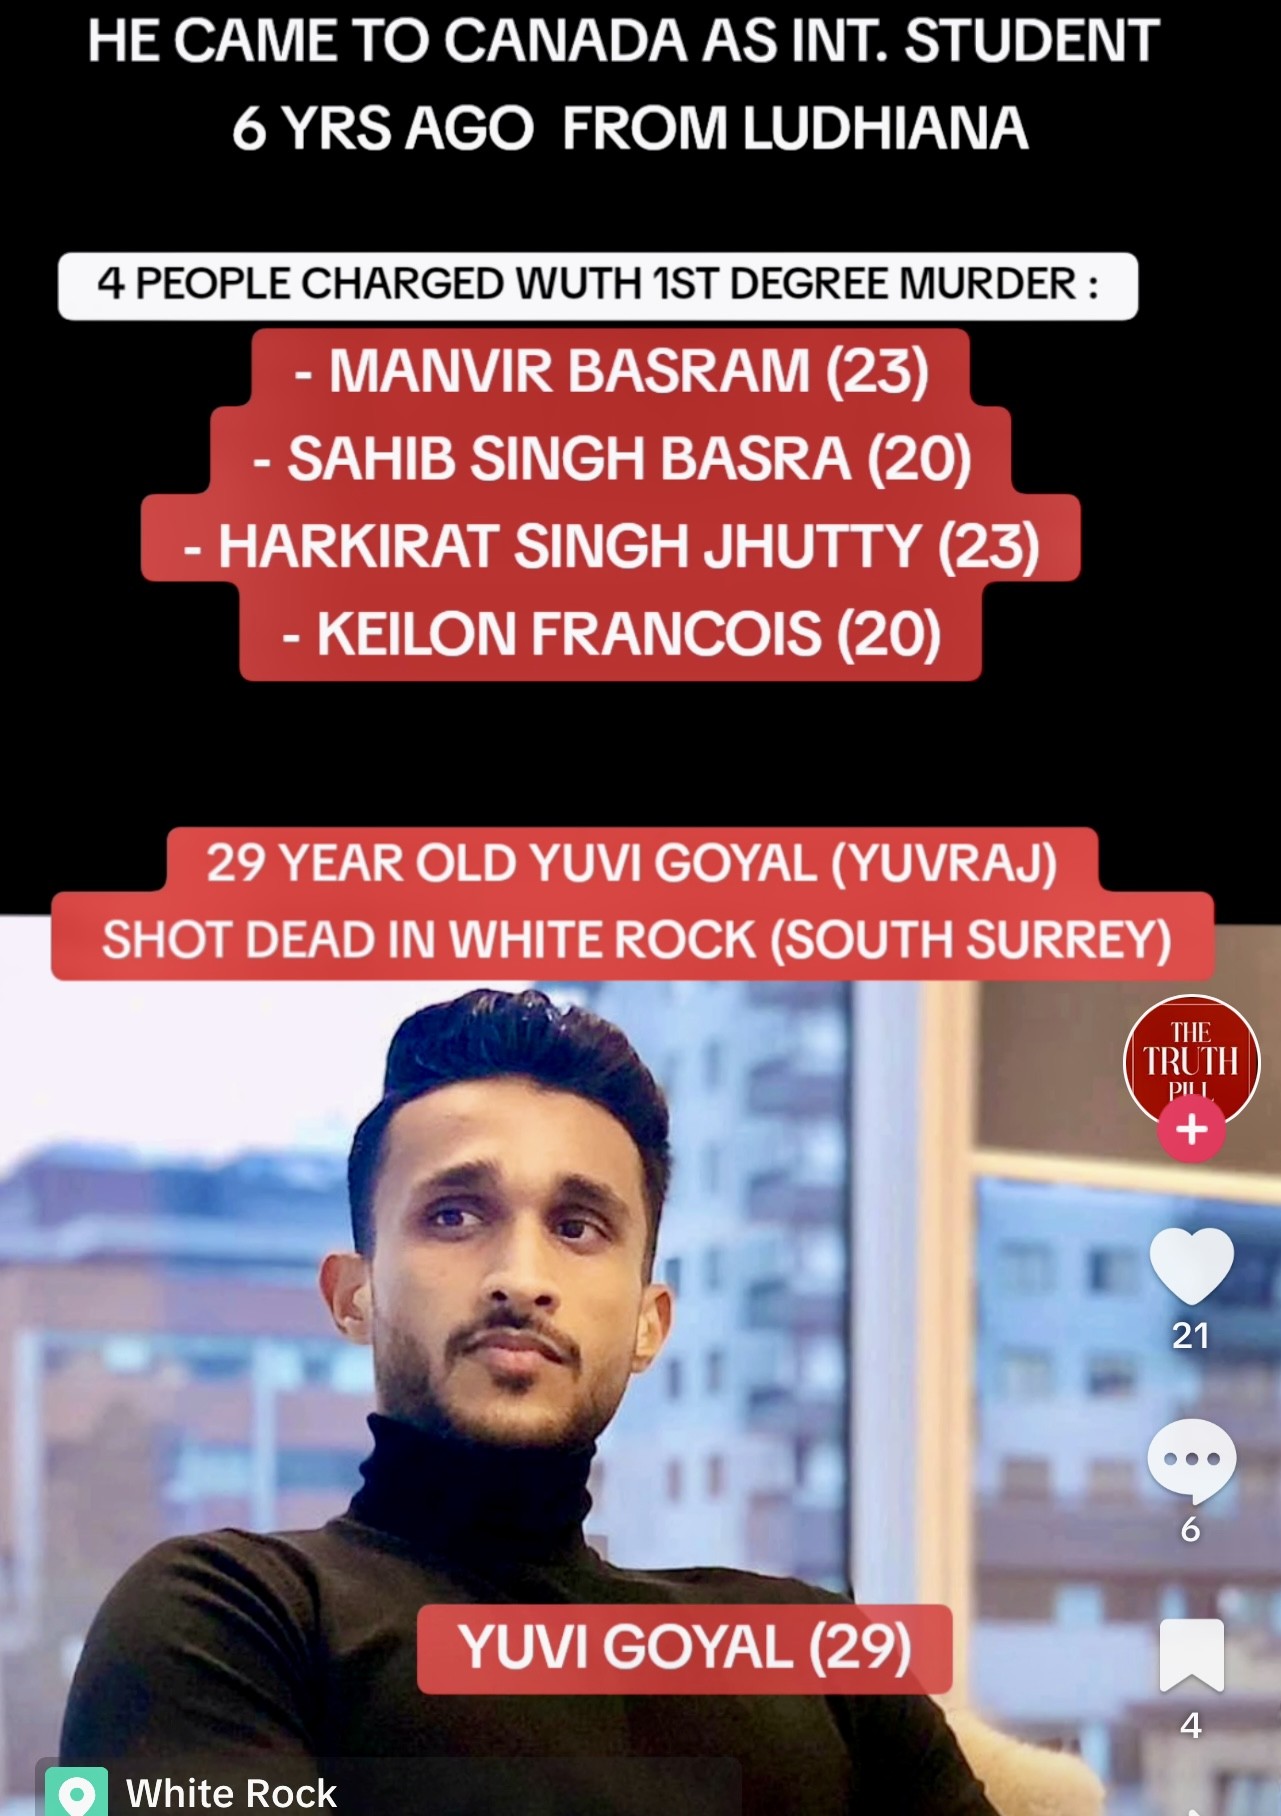 Three Indo-Canadian Men Among Four Arrested And charged In Murder Of Yuvraj Goyal In Surrey